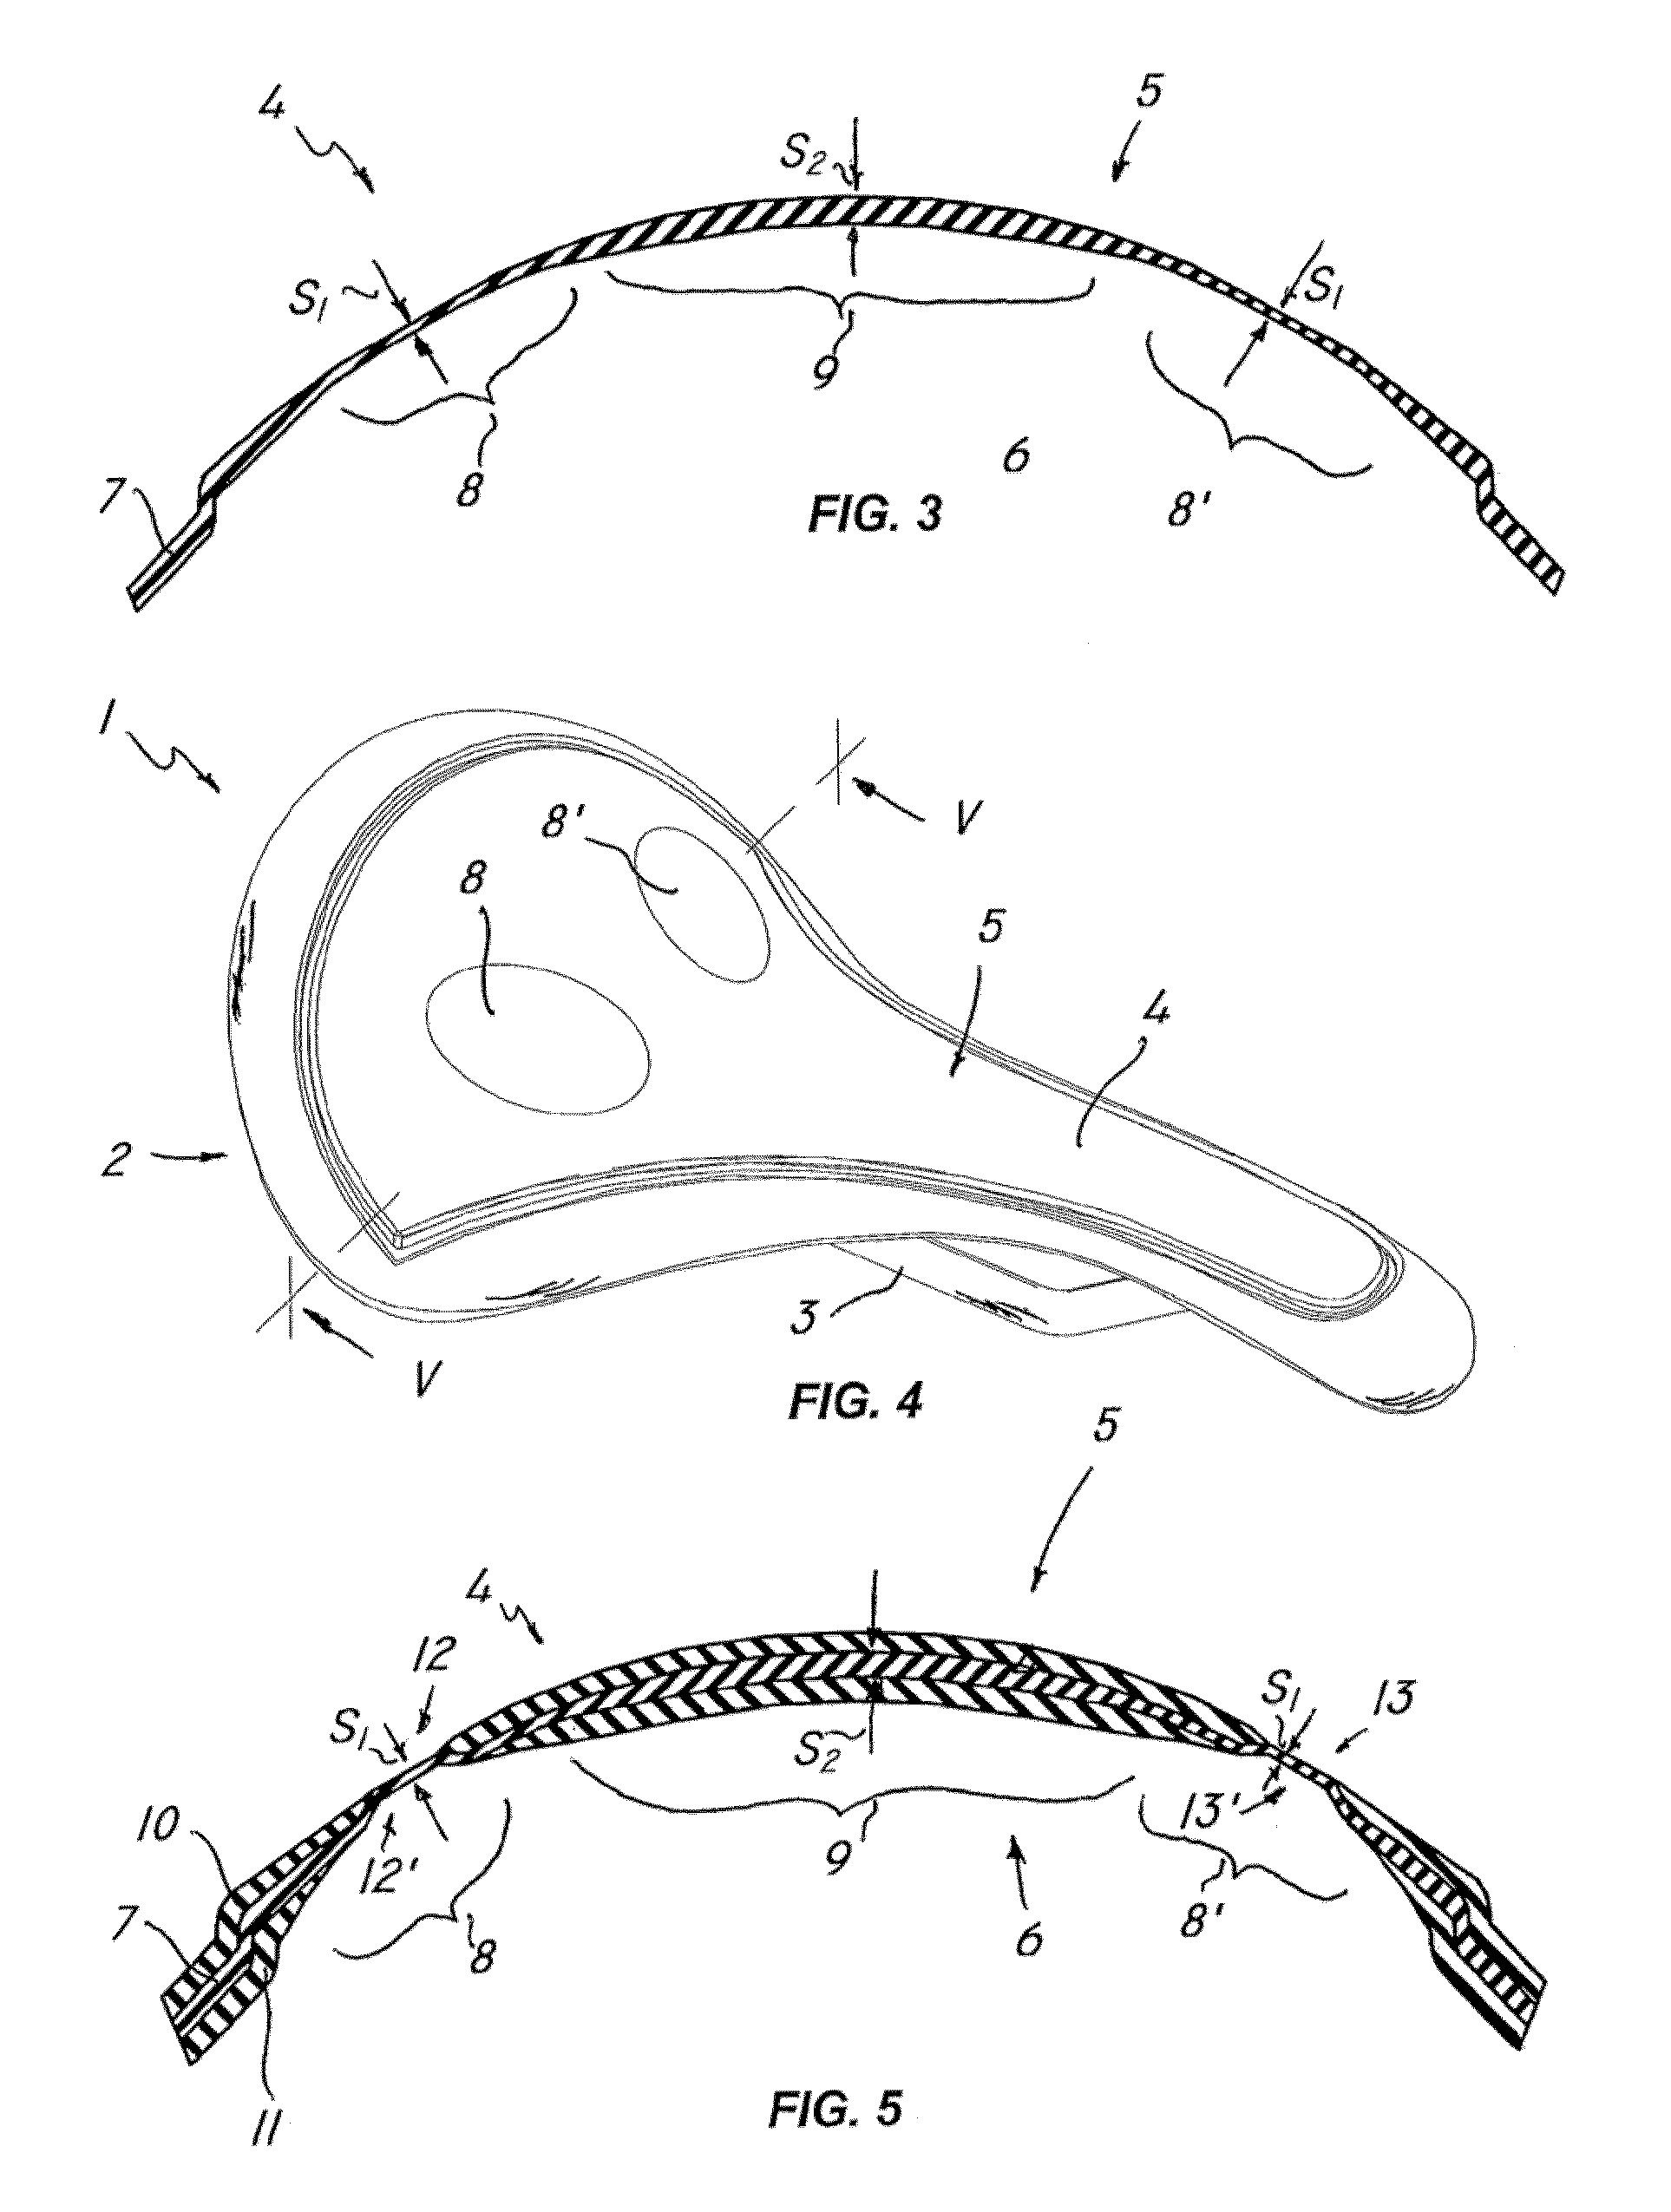 Human body supporting structure, particularly bicycle saddle and method of making same